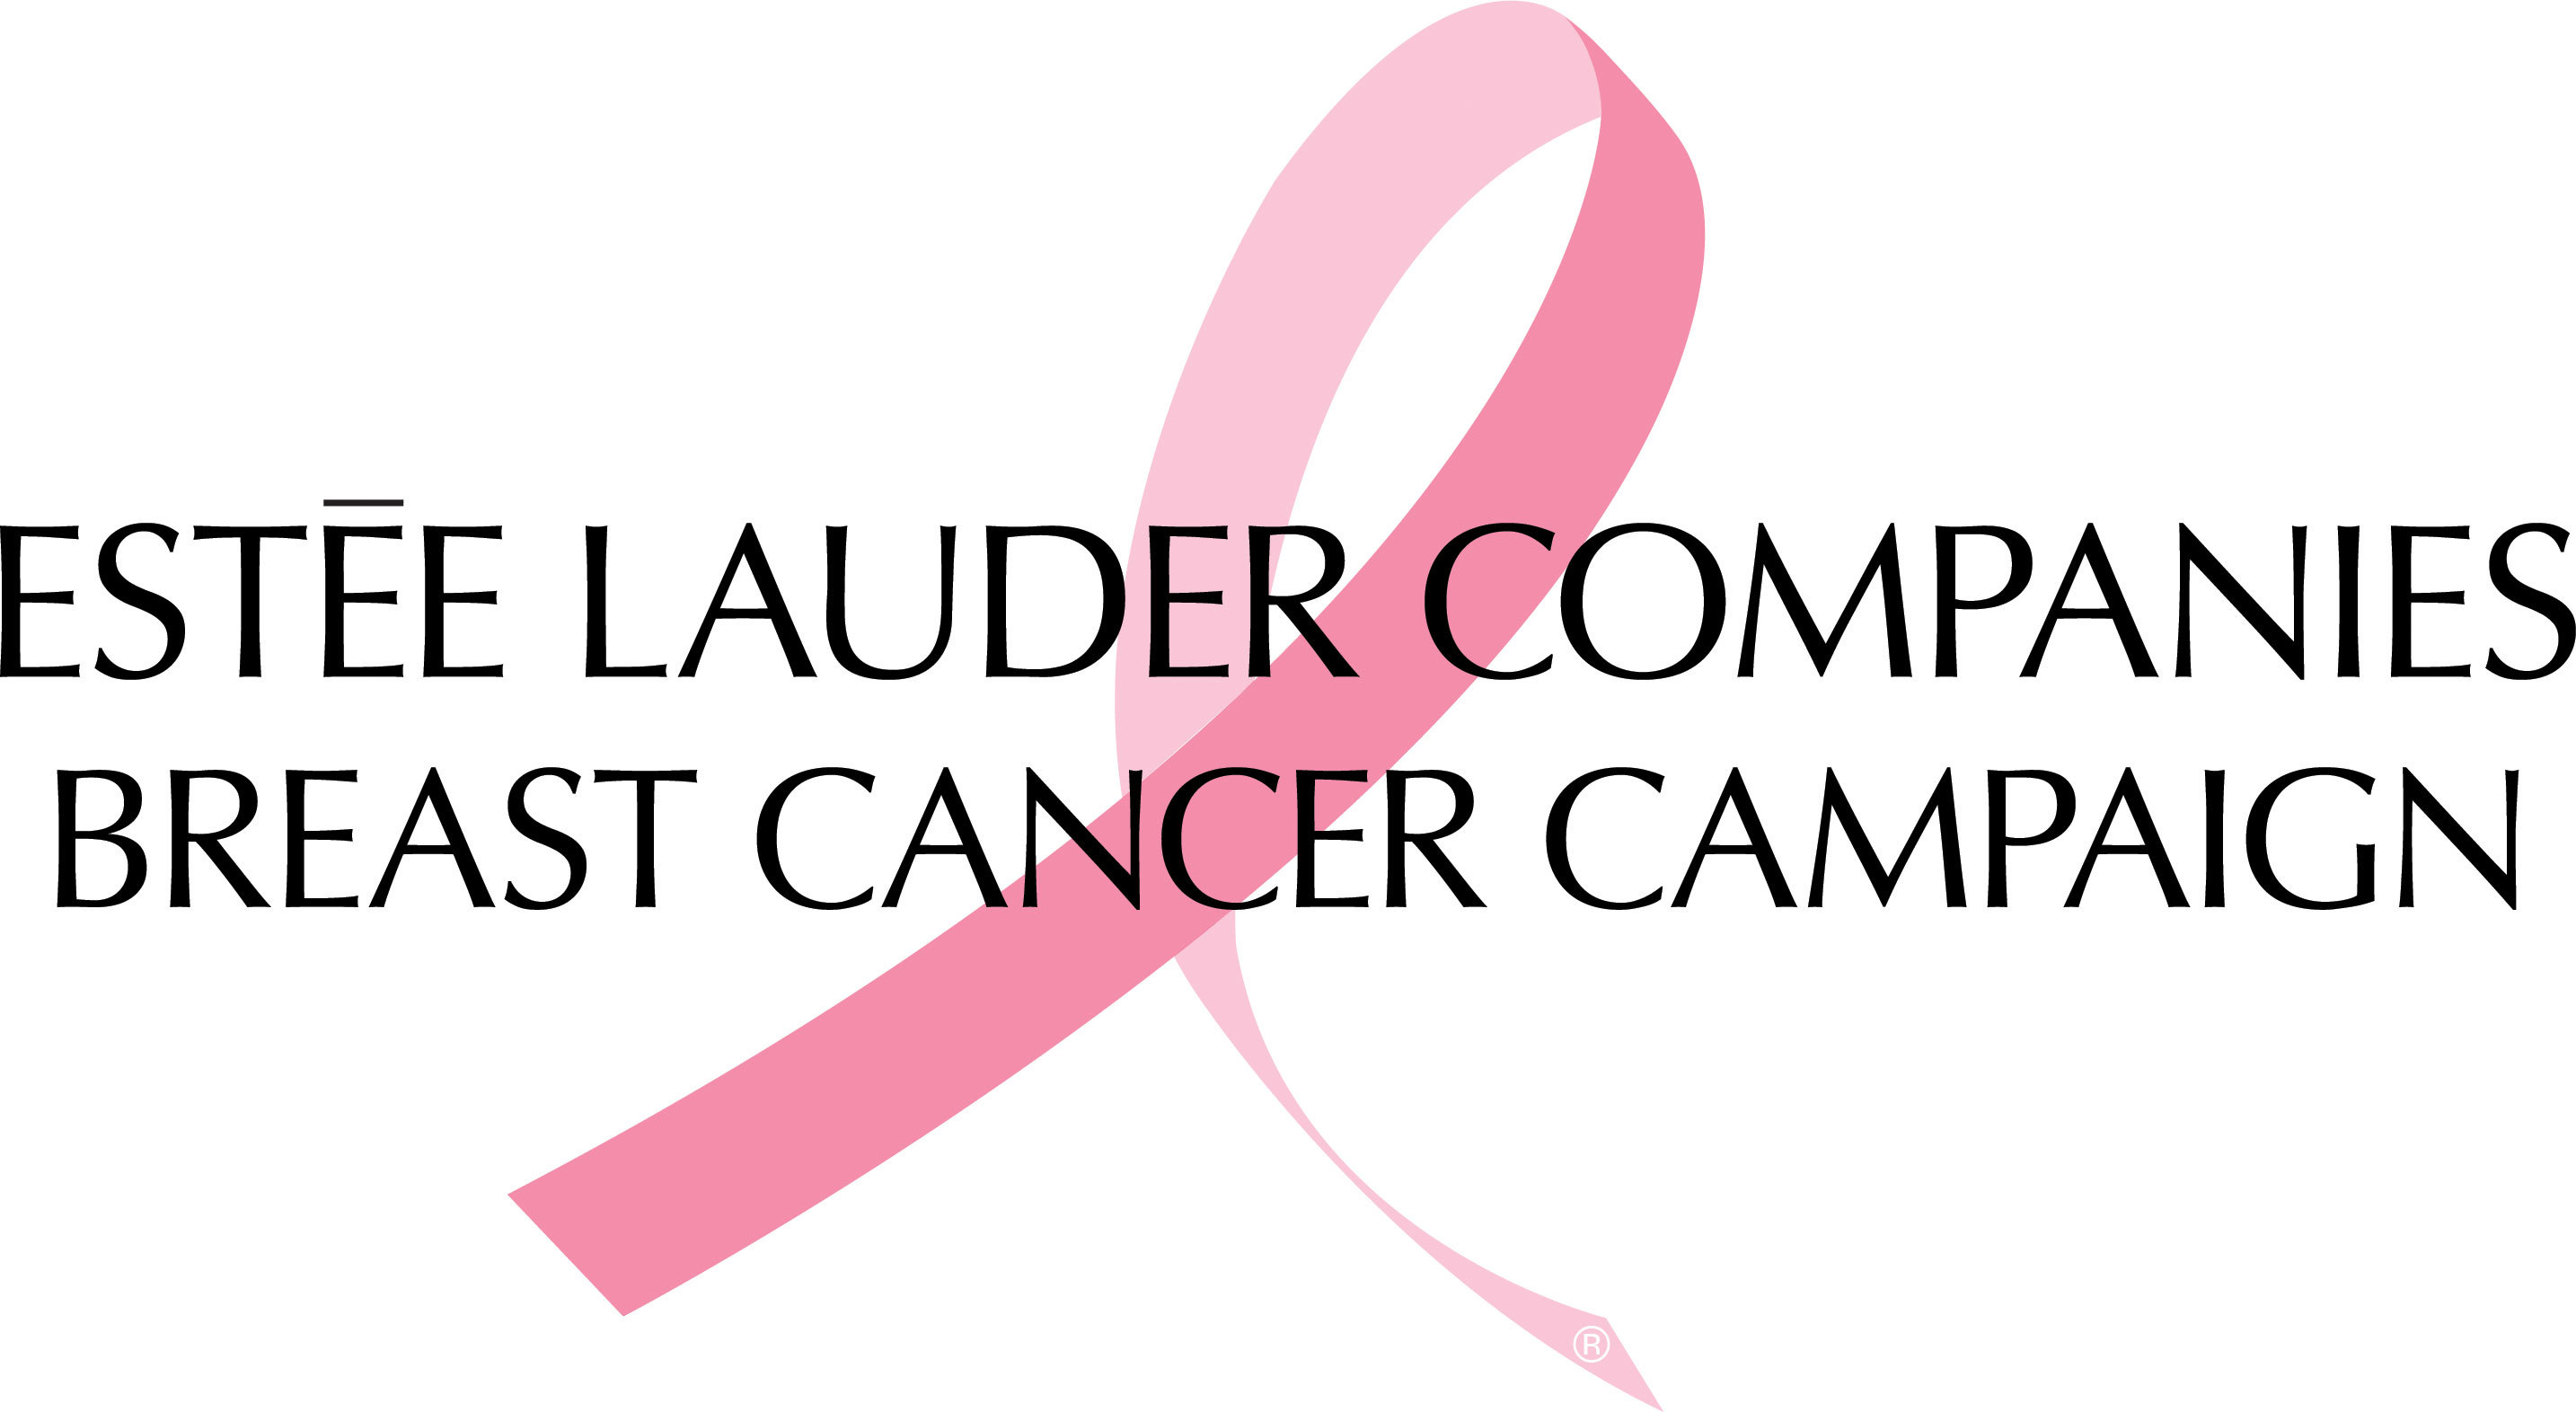 The Estee Lauder Companies Unites The World In Hope With Its 2019